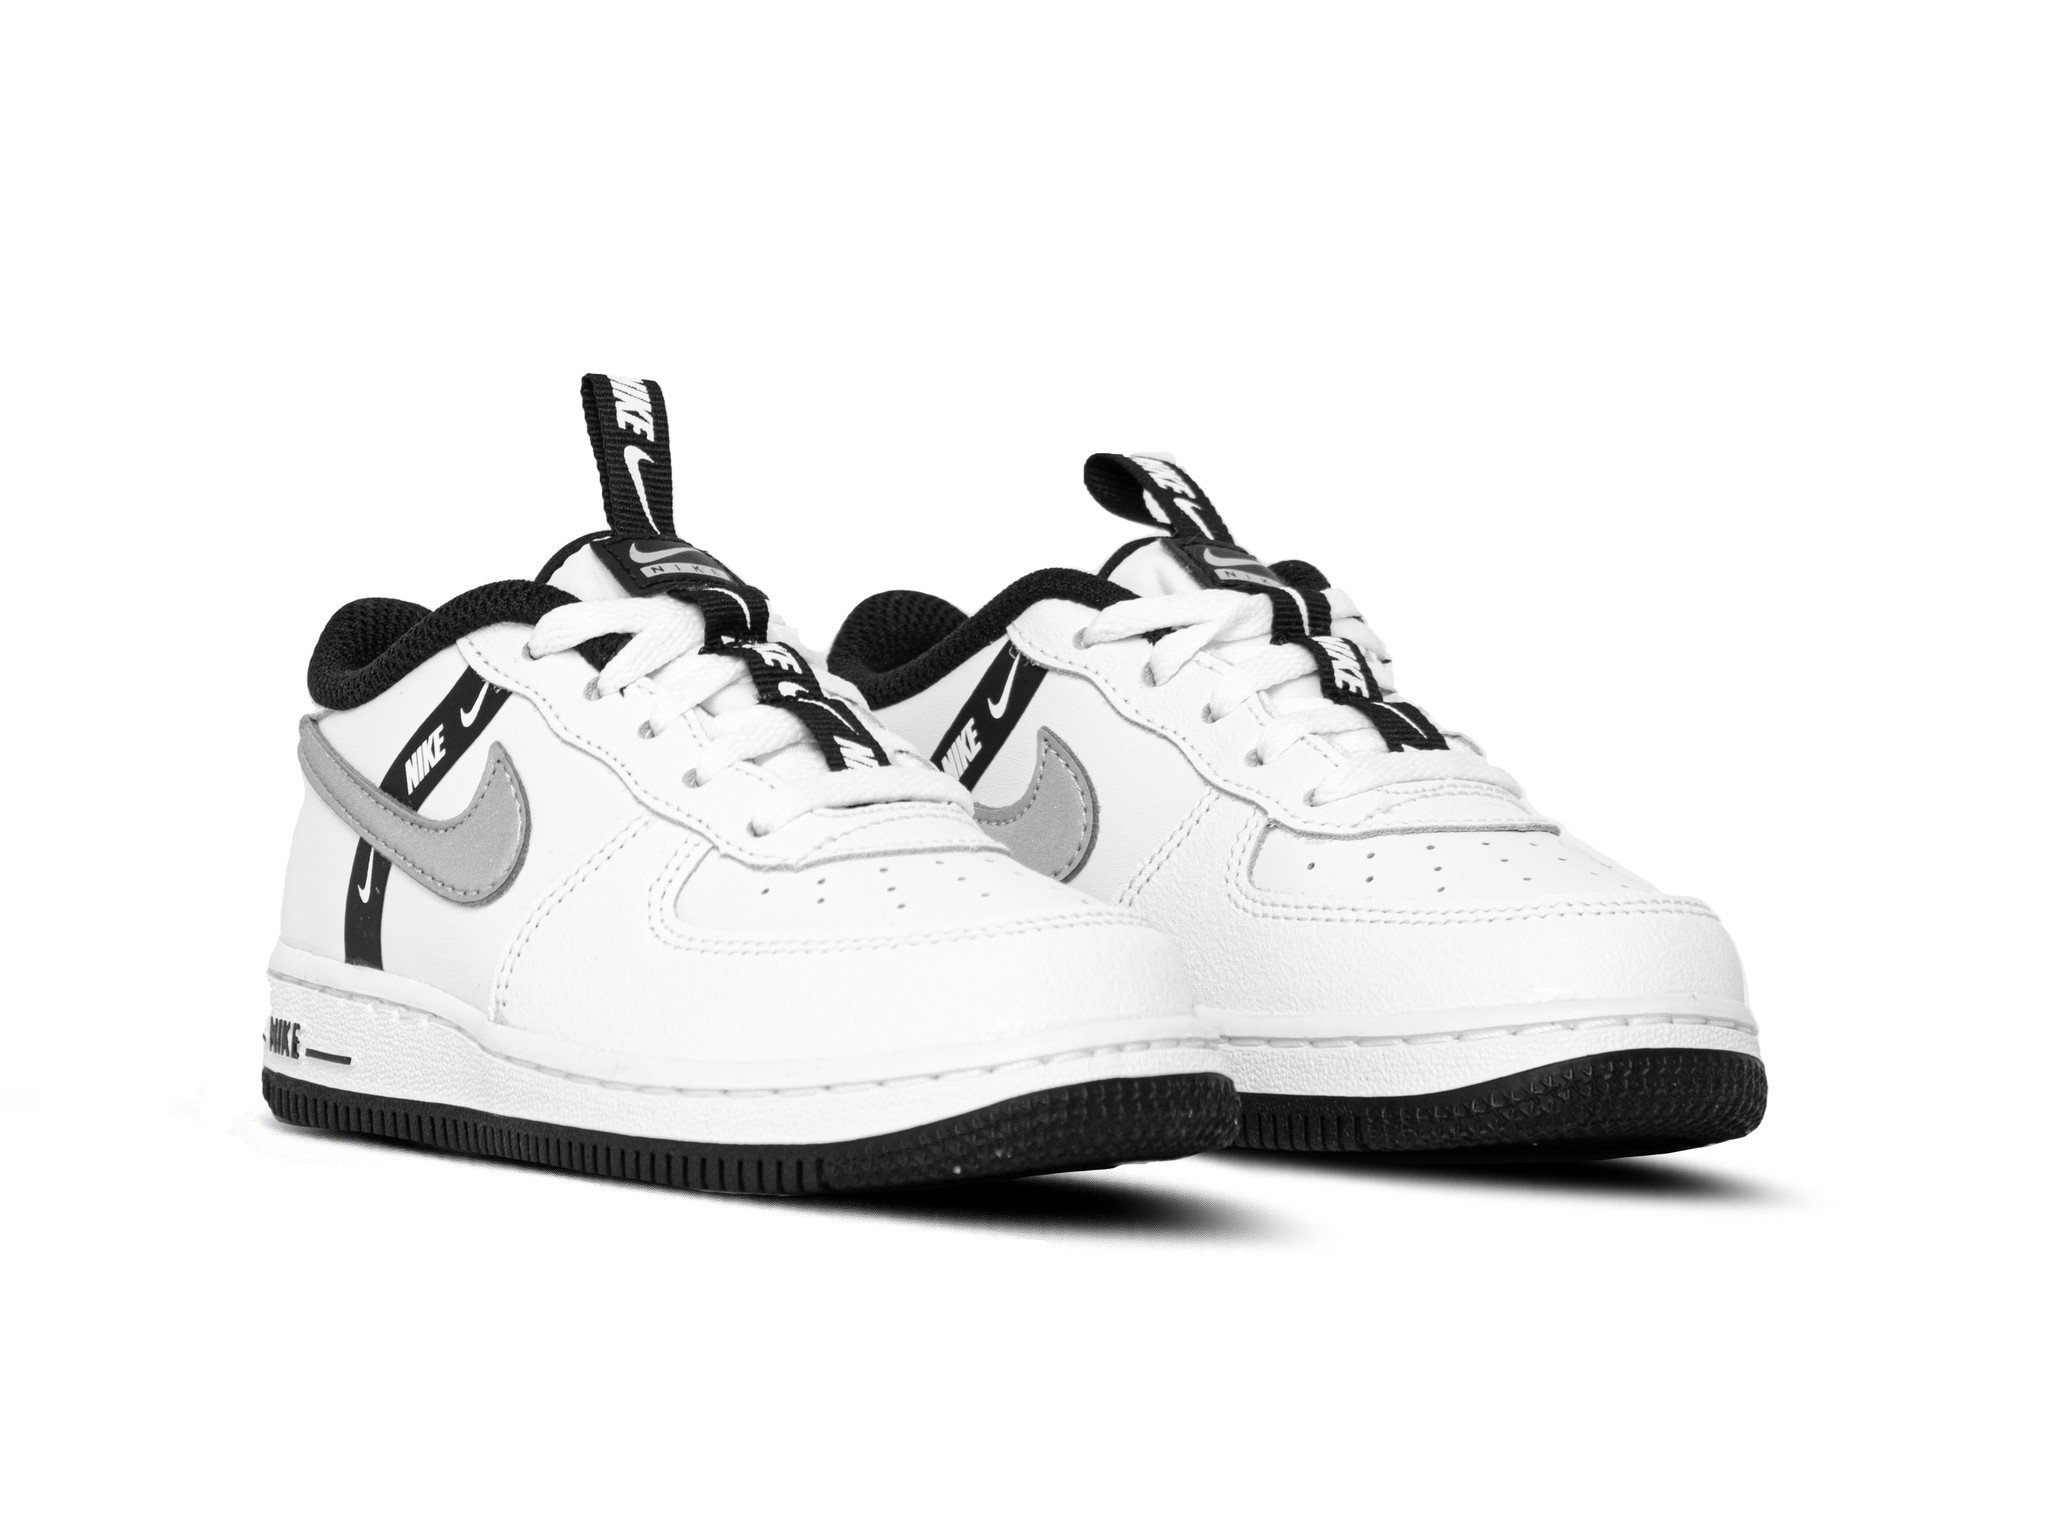 nike air force 1 lv8 reflective